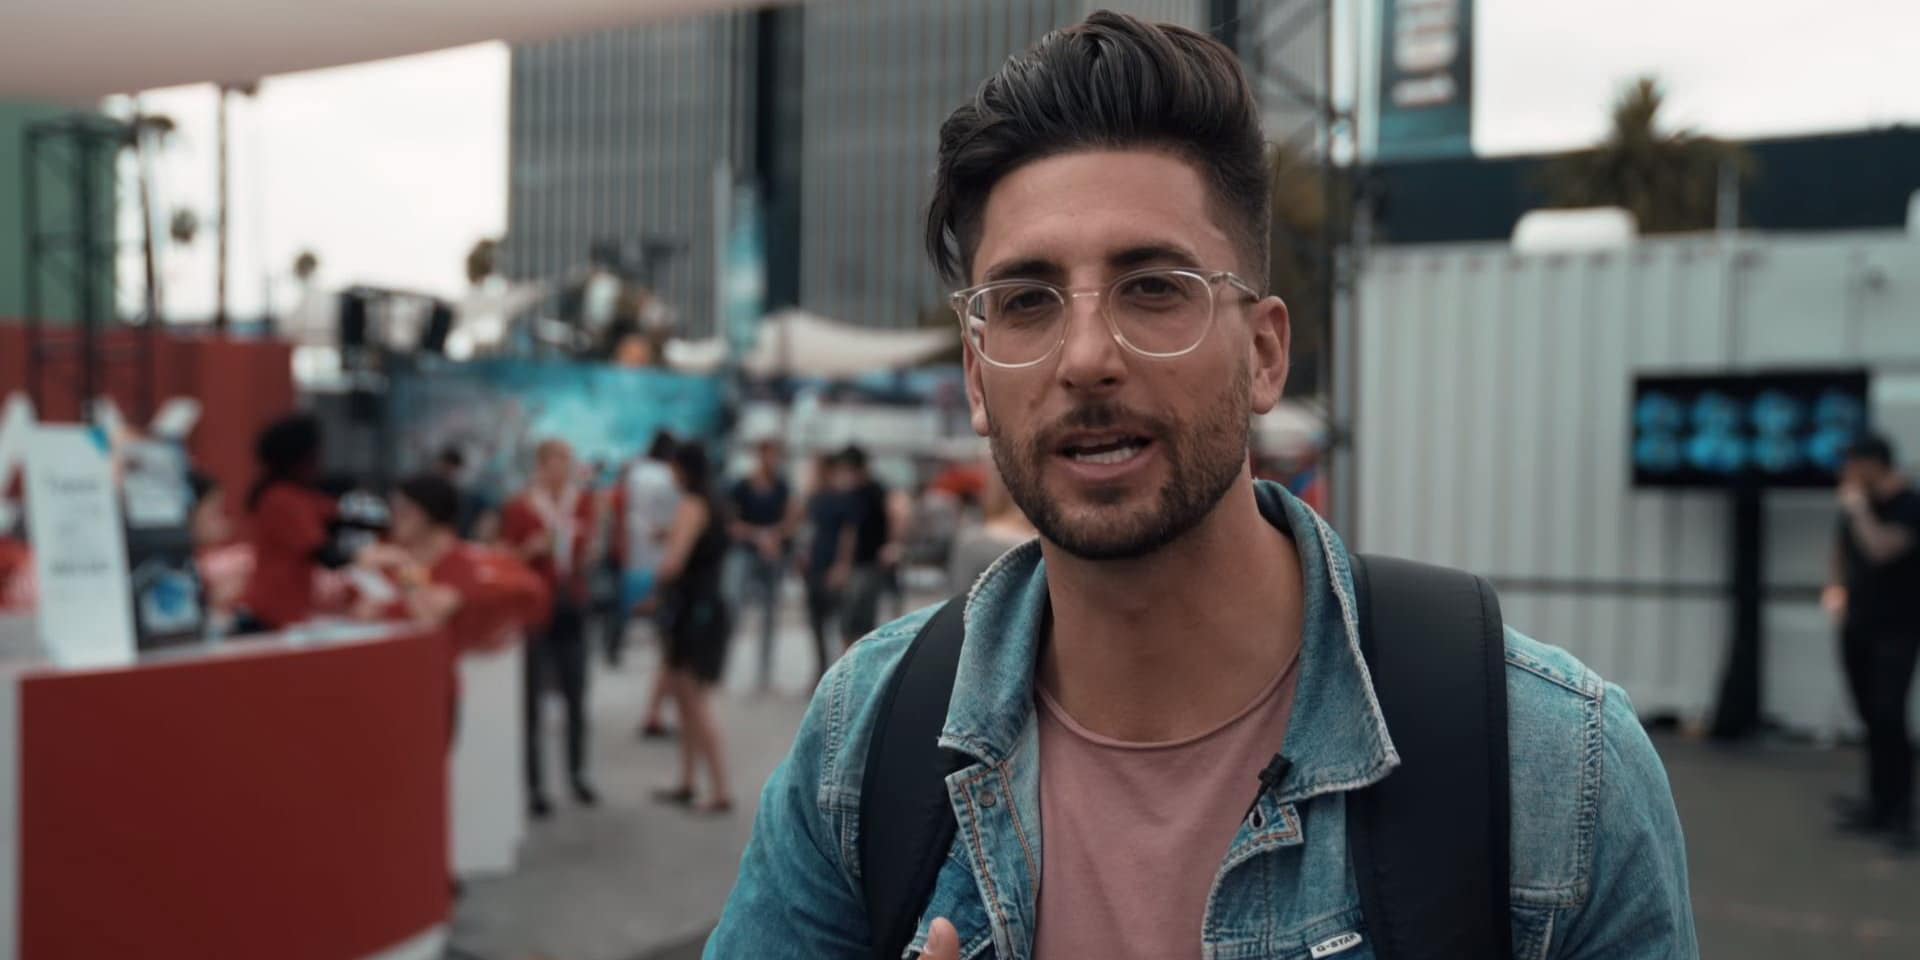 Who is YouTuber Jesse Wellens? 